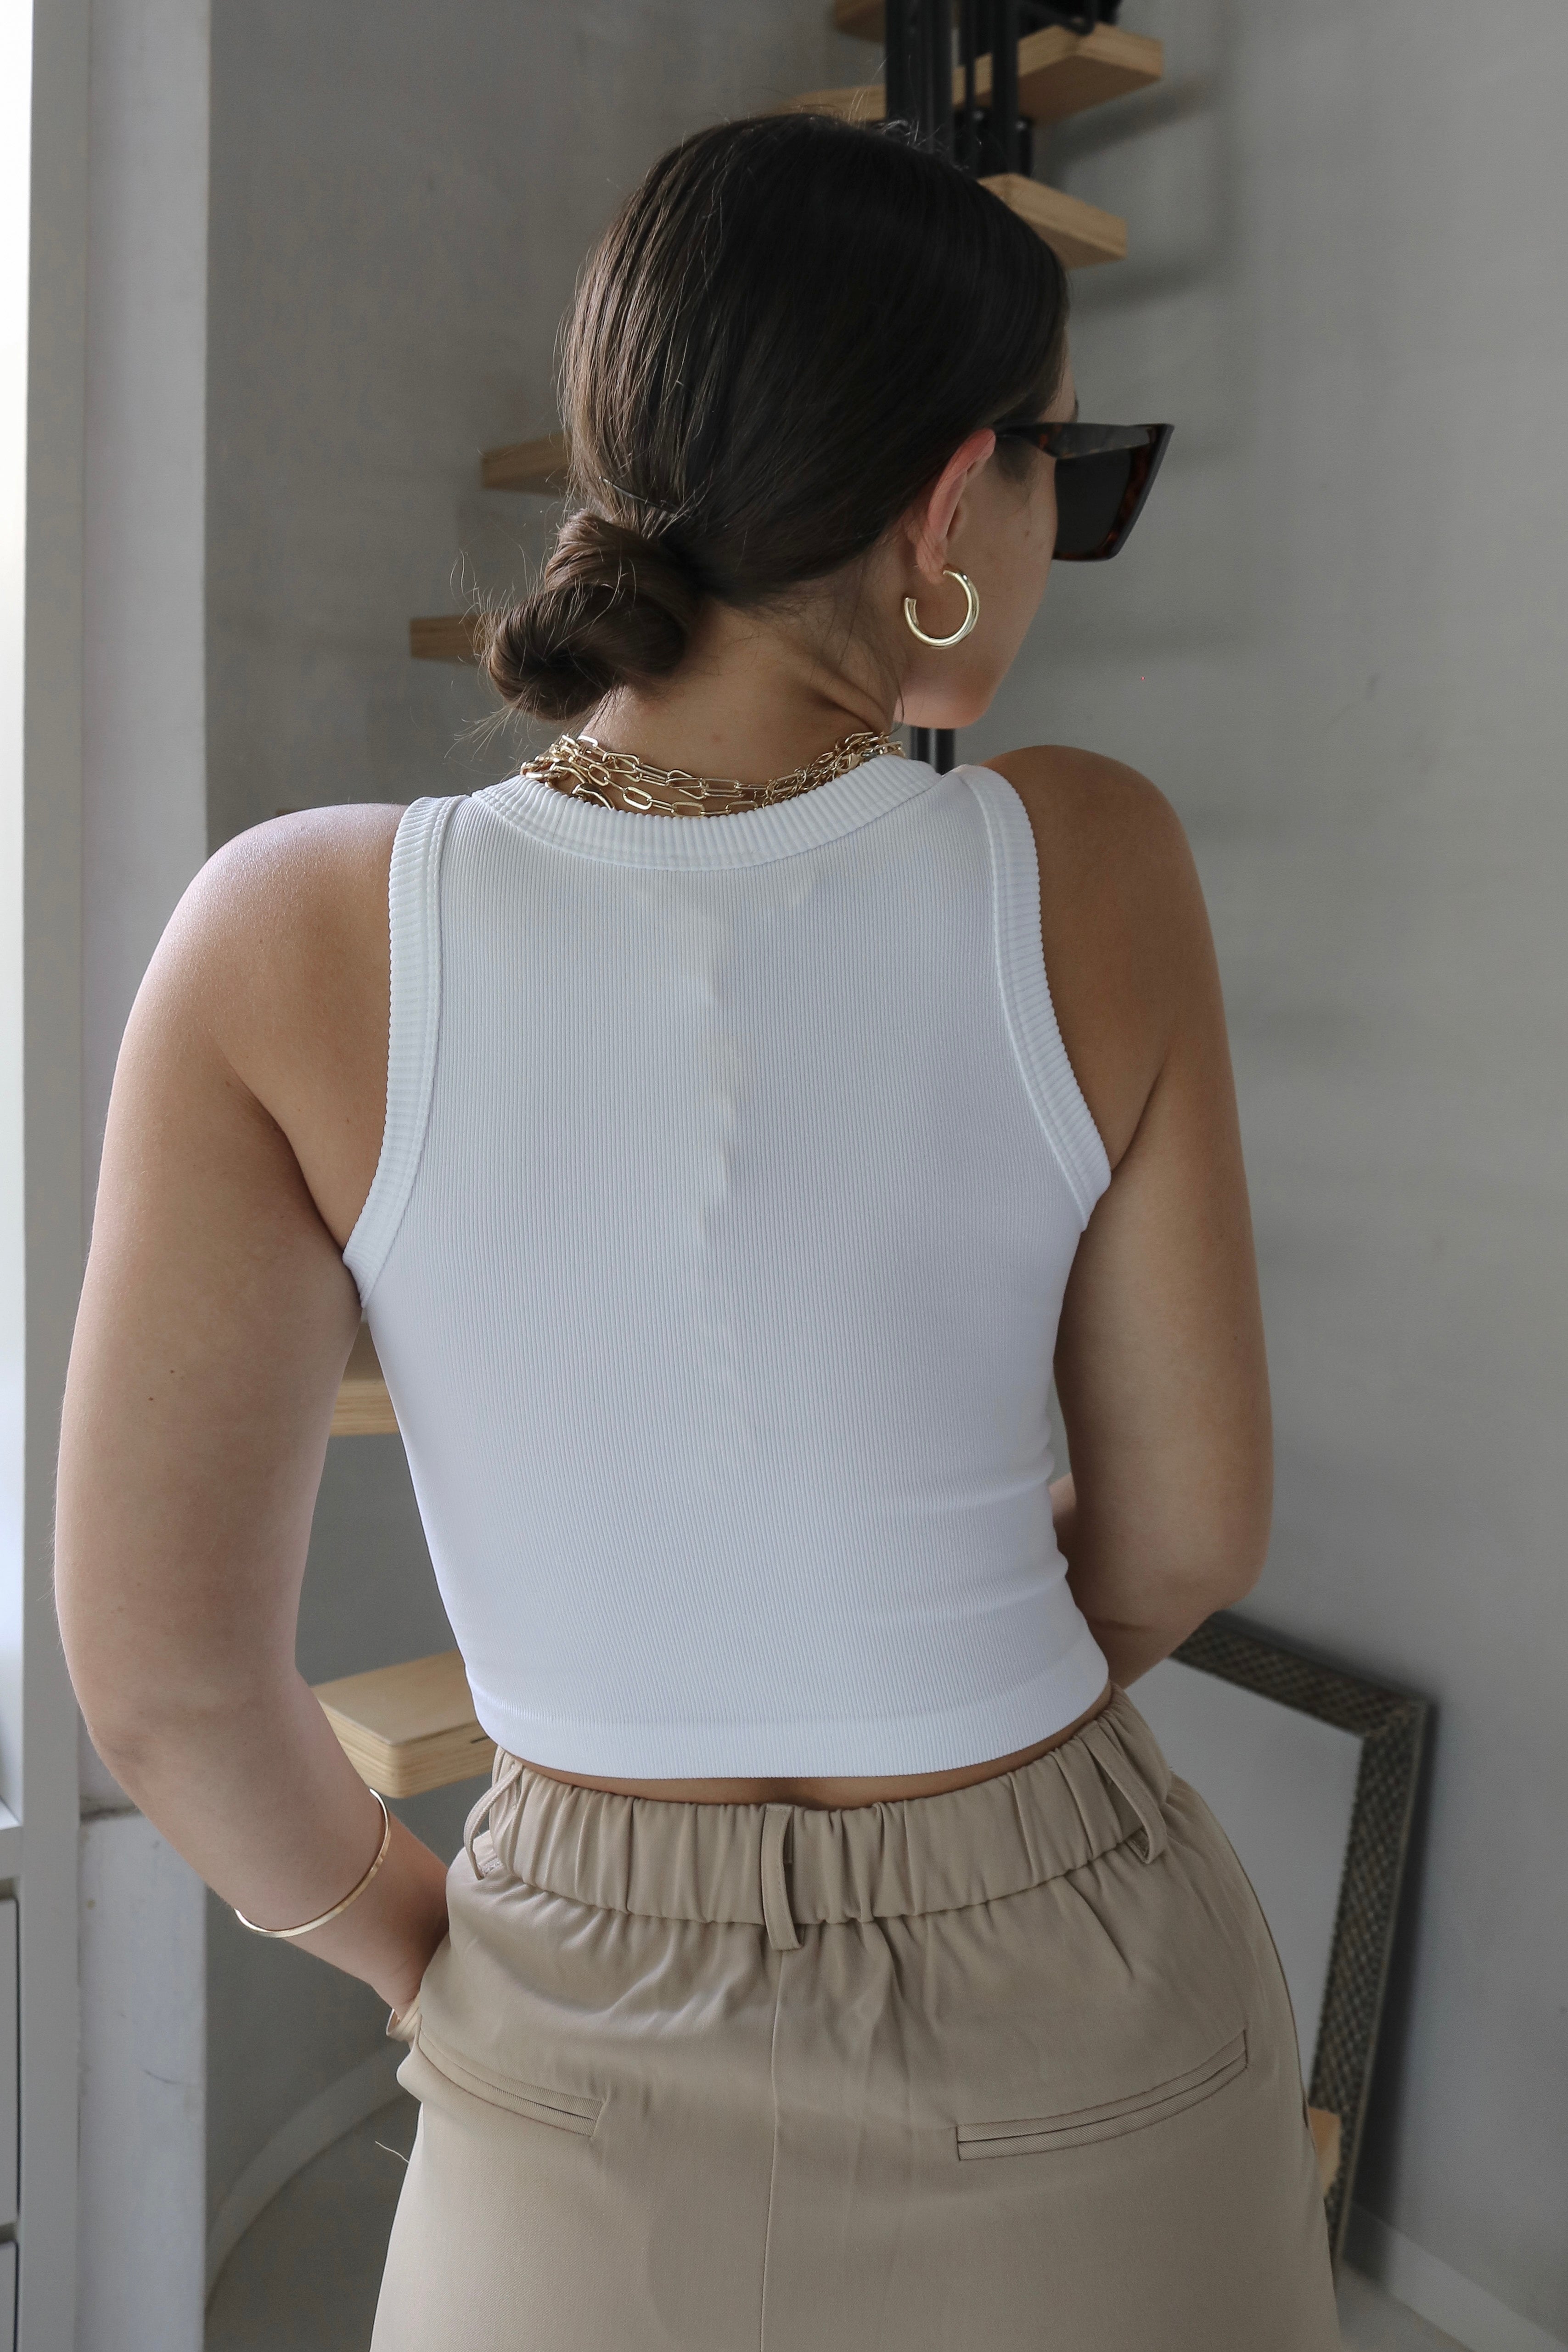 Ribbed Muscle Tank Top in White. Scarlette The Label, an online fashion boutique for women.